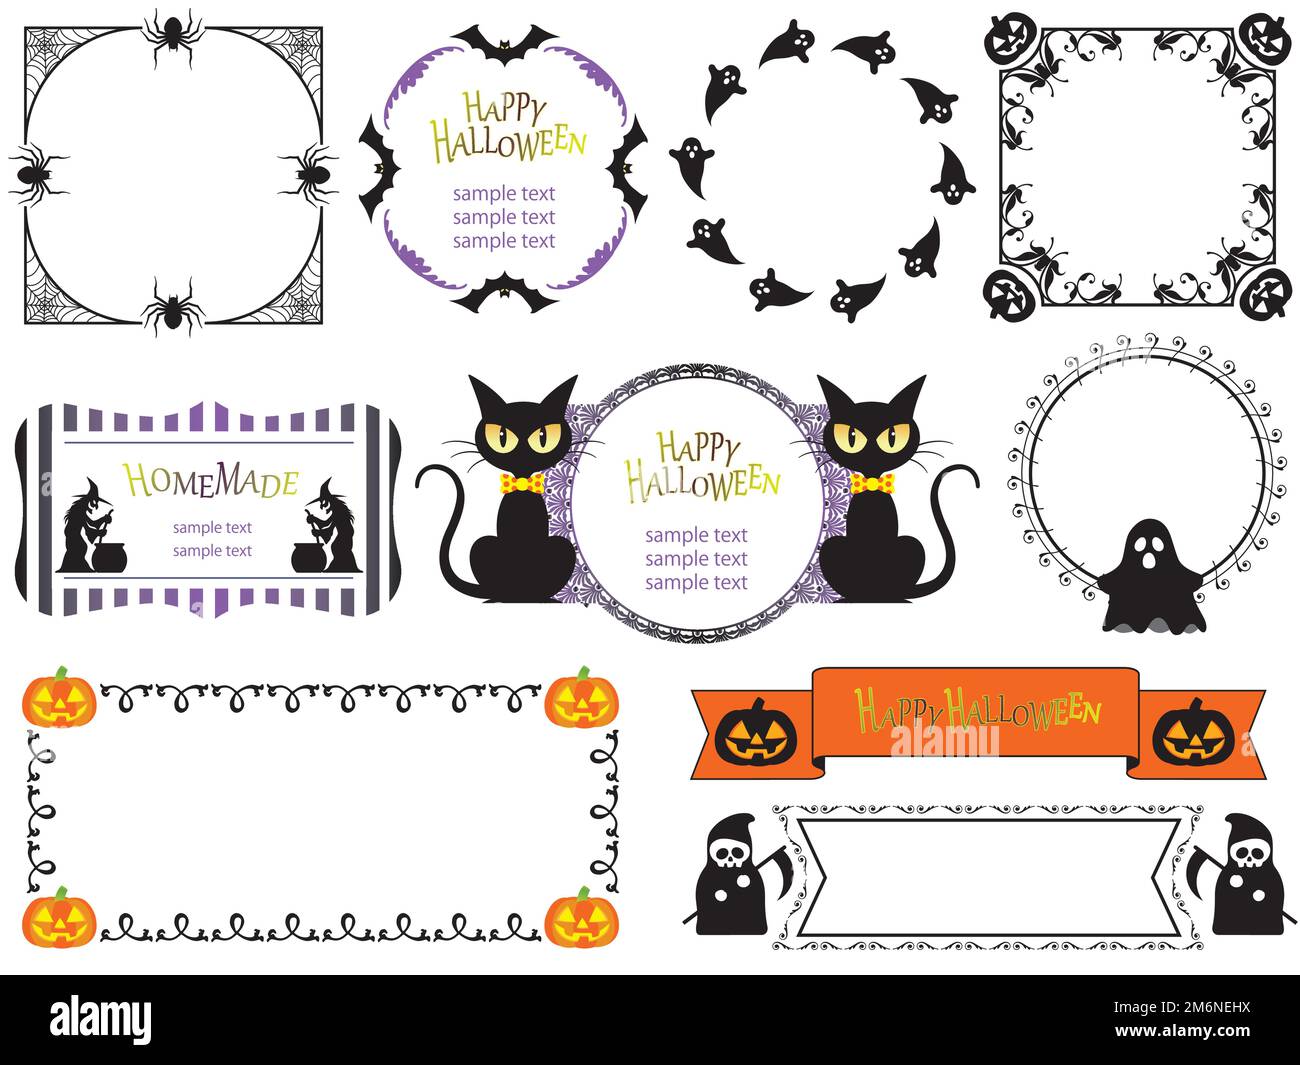 Set Of Happy Halloween Vector Frames Isolated On A White Background. Stock Vector